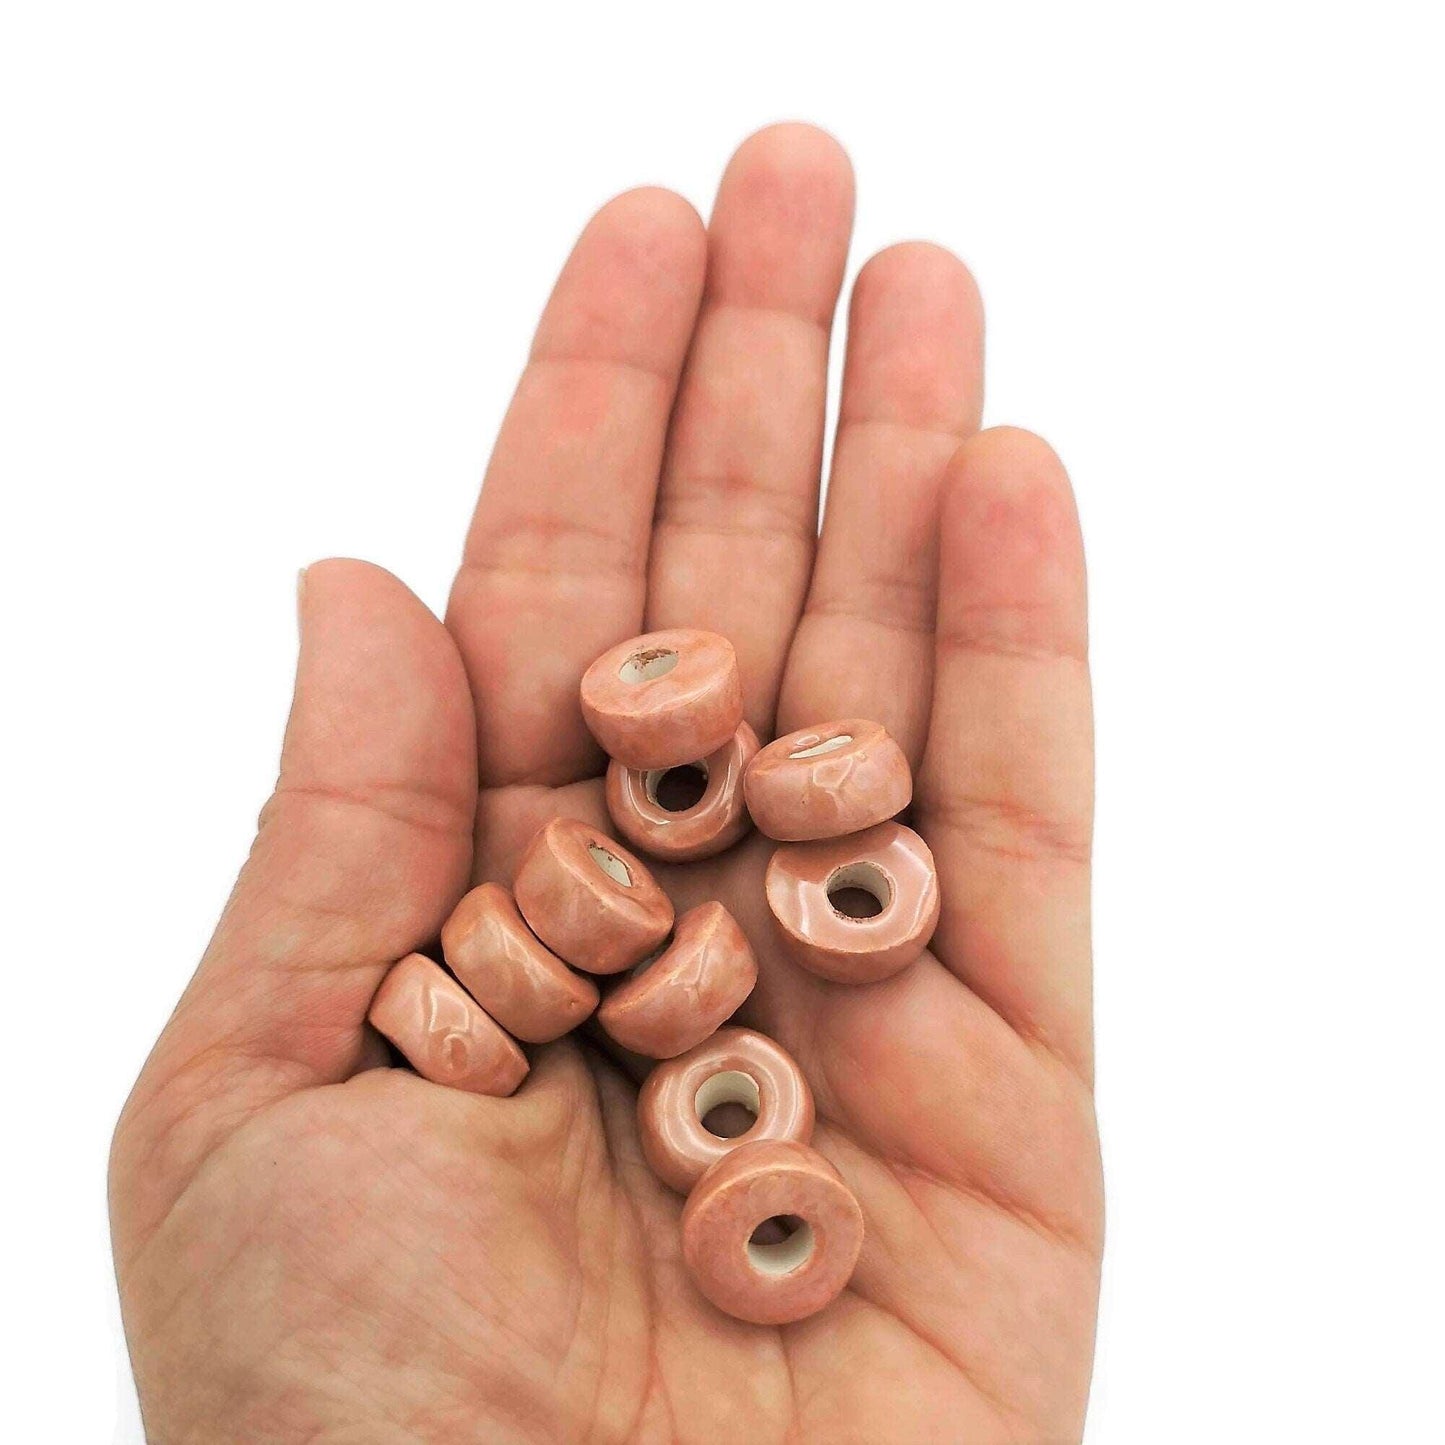 10Pc Ceramic Macrame Beads With Large Hole For Jewelry Making, Coral Pink Clay Tube Beads for Bracelets, Dreadlock Beads Braid Accessories